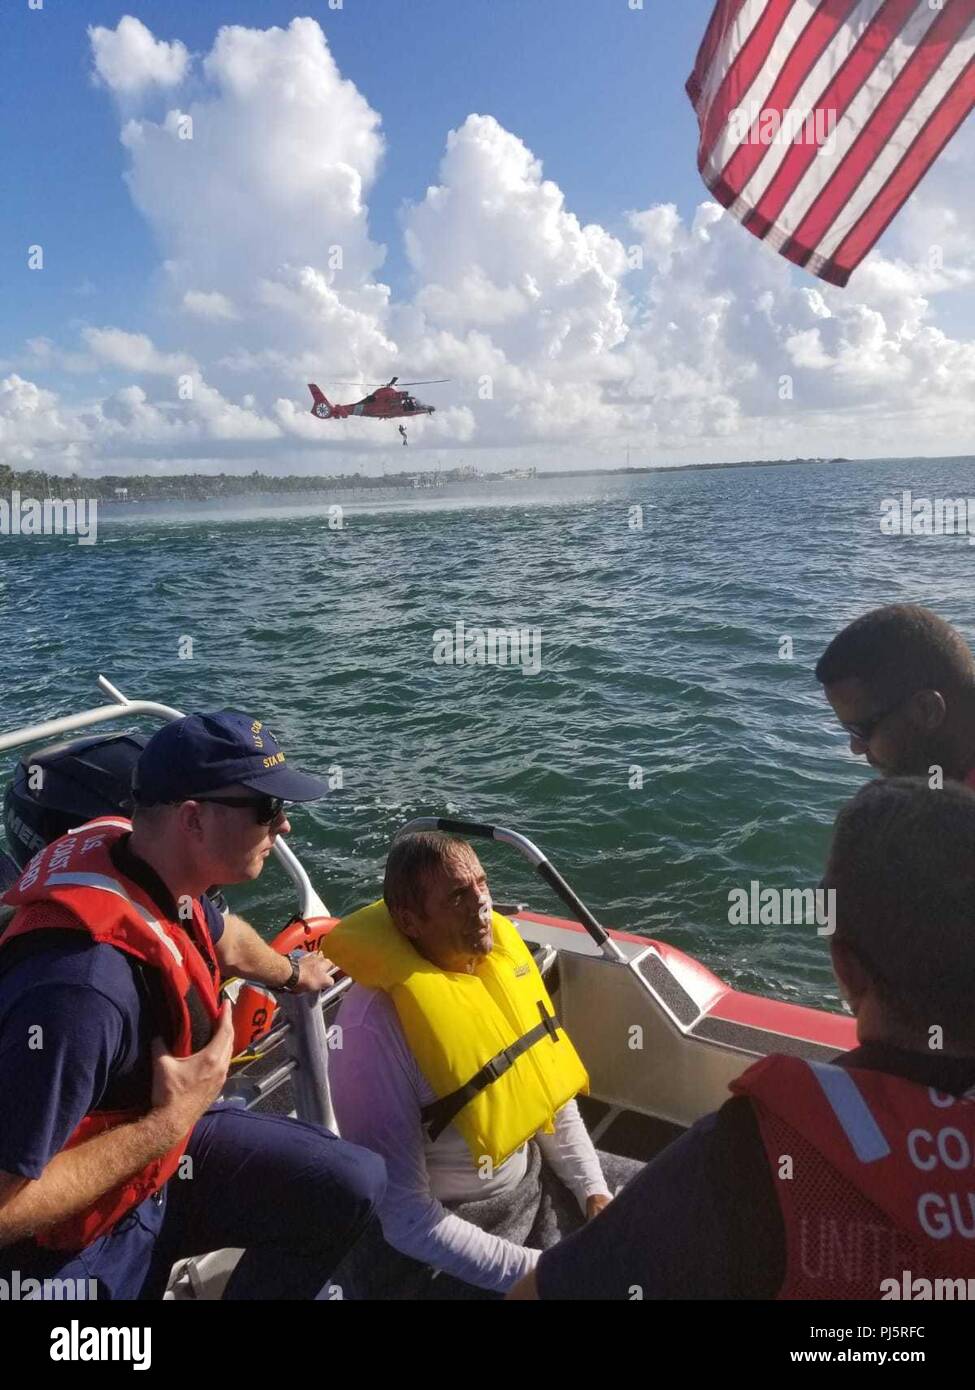 Robert Vonnegut sits aboard a Coast Guard Station Islamorada 33-foot Special Purpose Craft-Law Enforcement boat after being rescued by the crewmembers Aug. 27, 2018 near Tavernier, Florida. The boatcrew and a Coast Guard Air Station Miami MH-65 helicopter crew went searching for Vonnegut after watchstanders at Coast Guard Sector Key West received a report from the son of Vonnegut stating his father departed from Sunrise Drive and hadn't returned. (Coast Guard Photo) Stock Photo